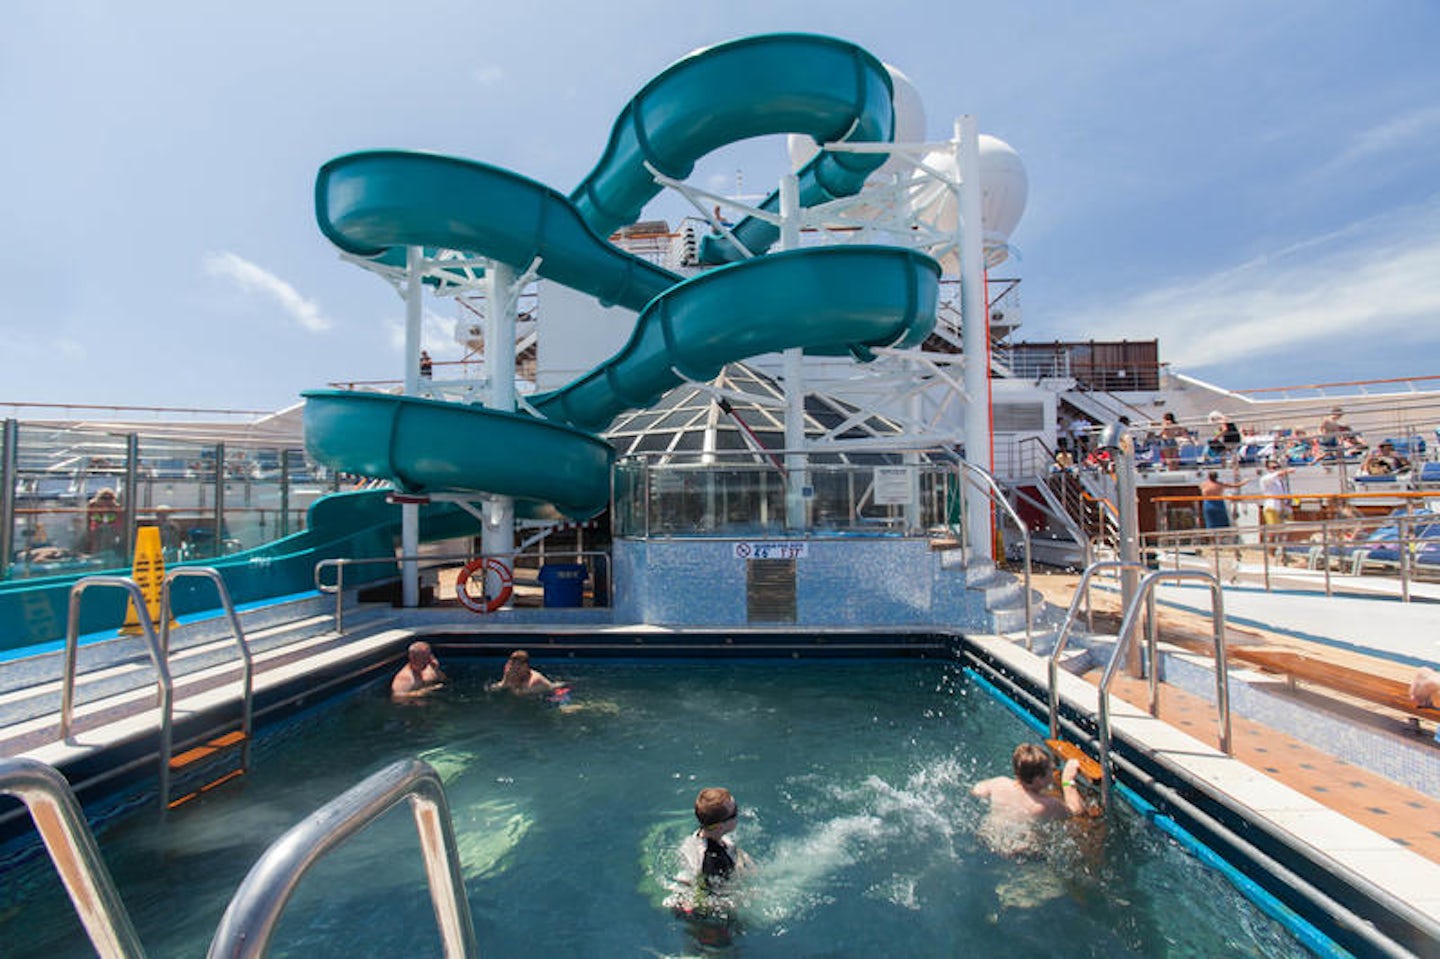 The Twister Waterslide on Carnival Valor